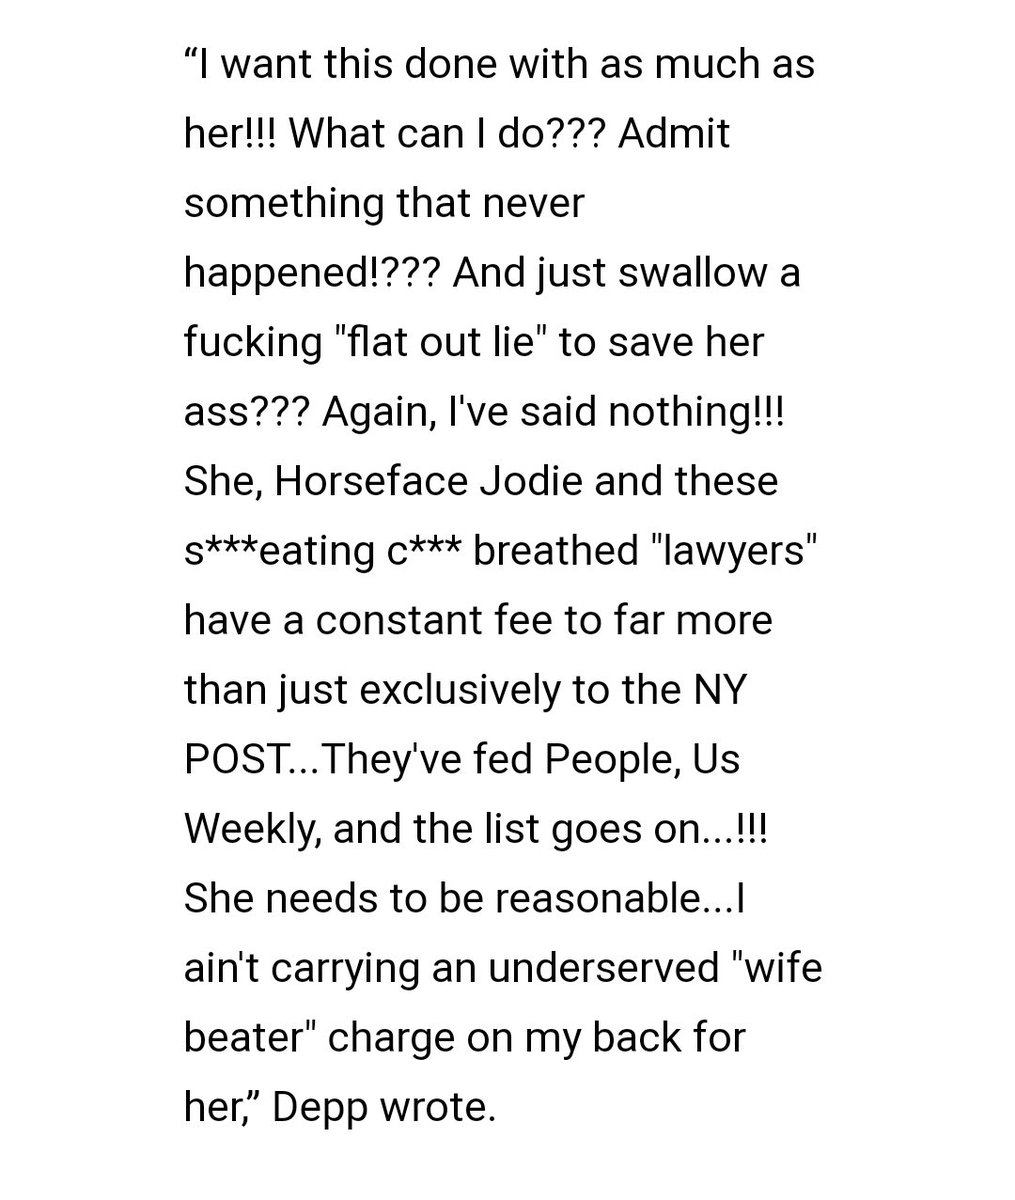 He says that he can't admit something that never happened or swallow a "flat out lie" to have this over with. He also accuses her of feeding things to NYP, People and US weekly (which, yeah she did). He says he refuses to carry an undeserved charge of a "wife beater" for her.